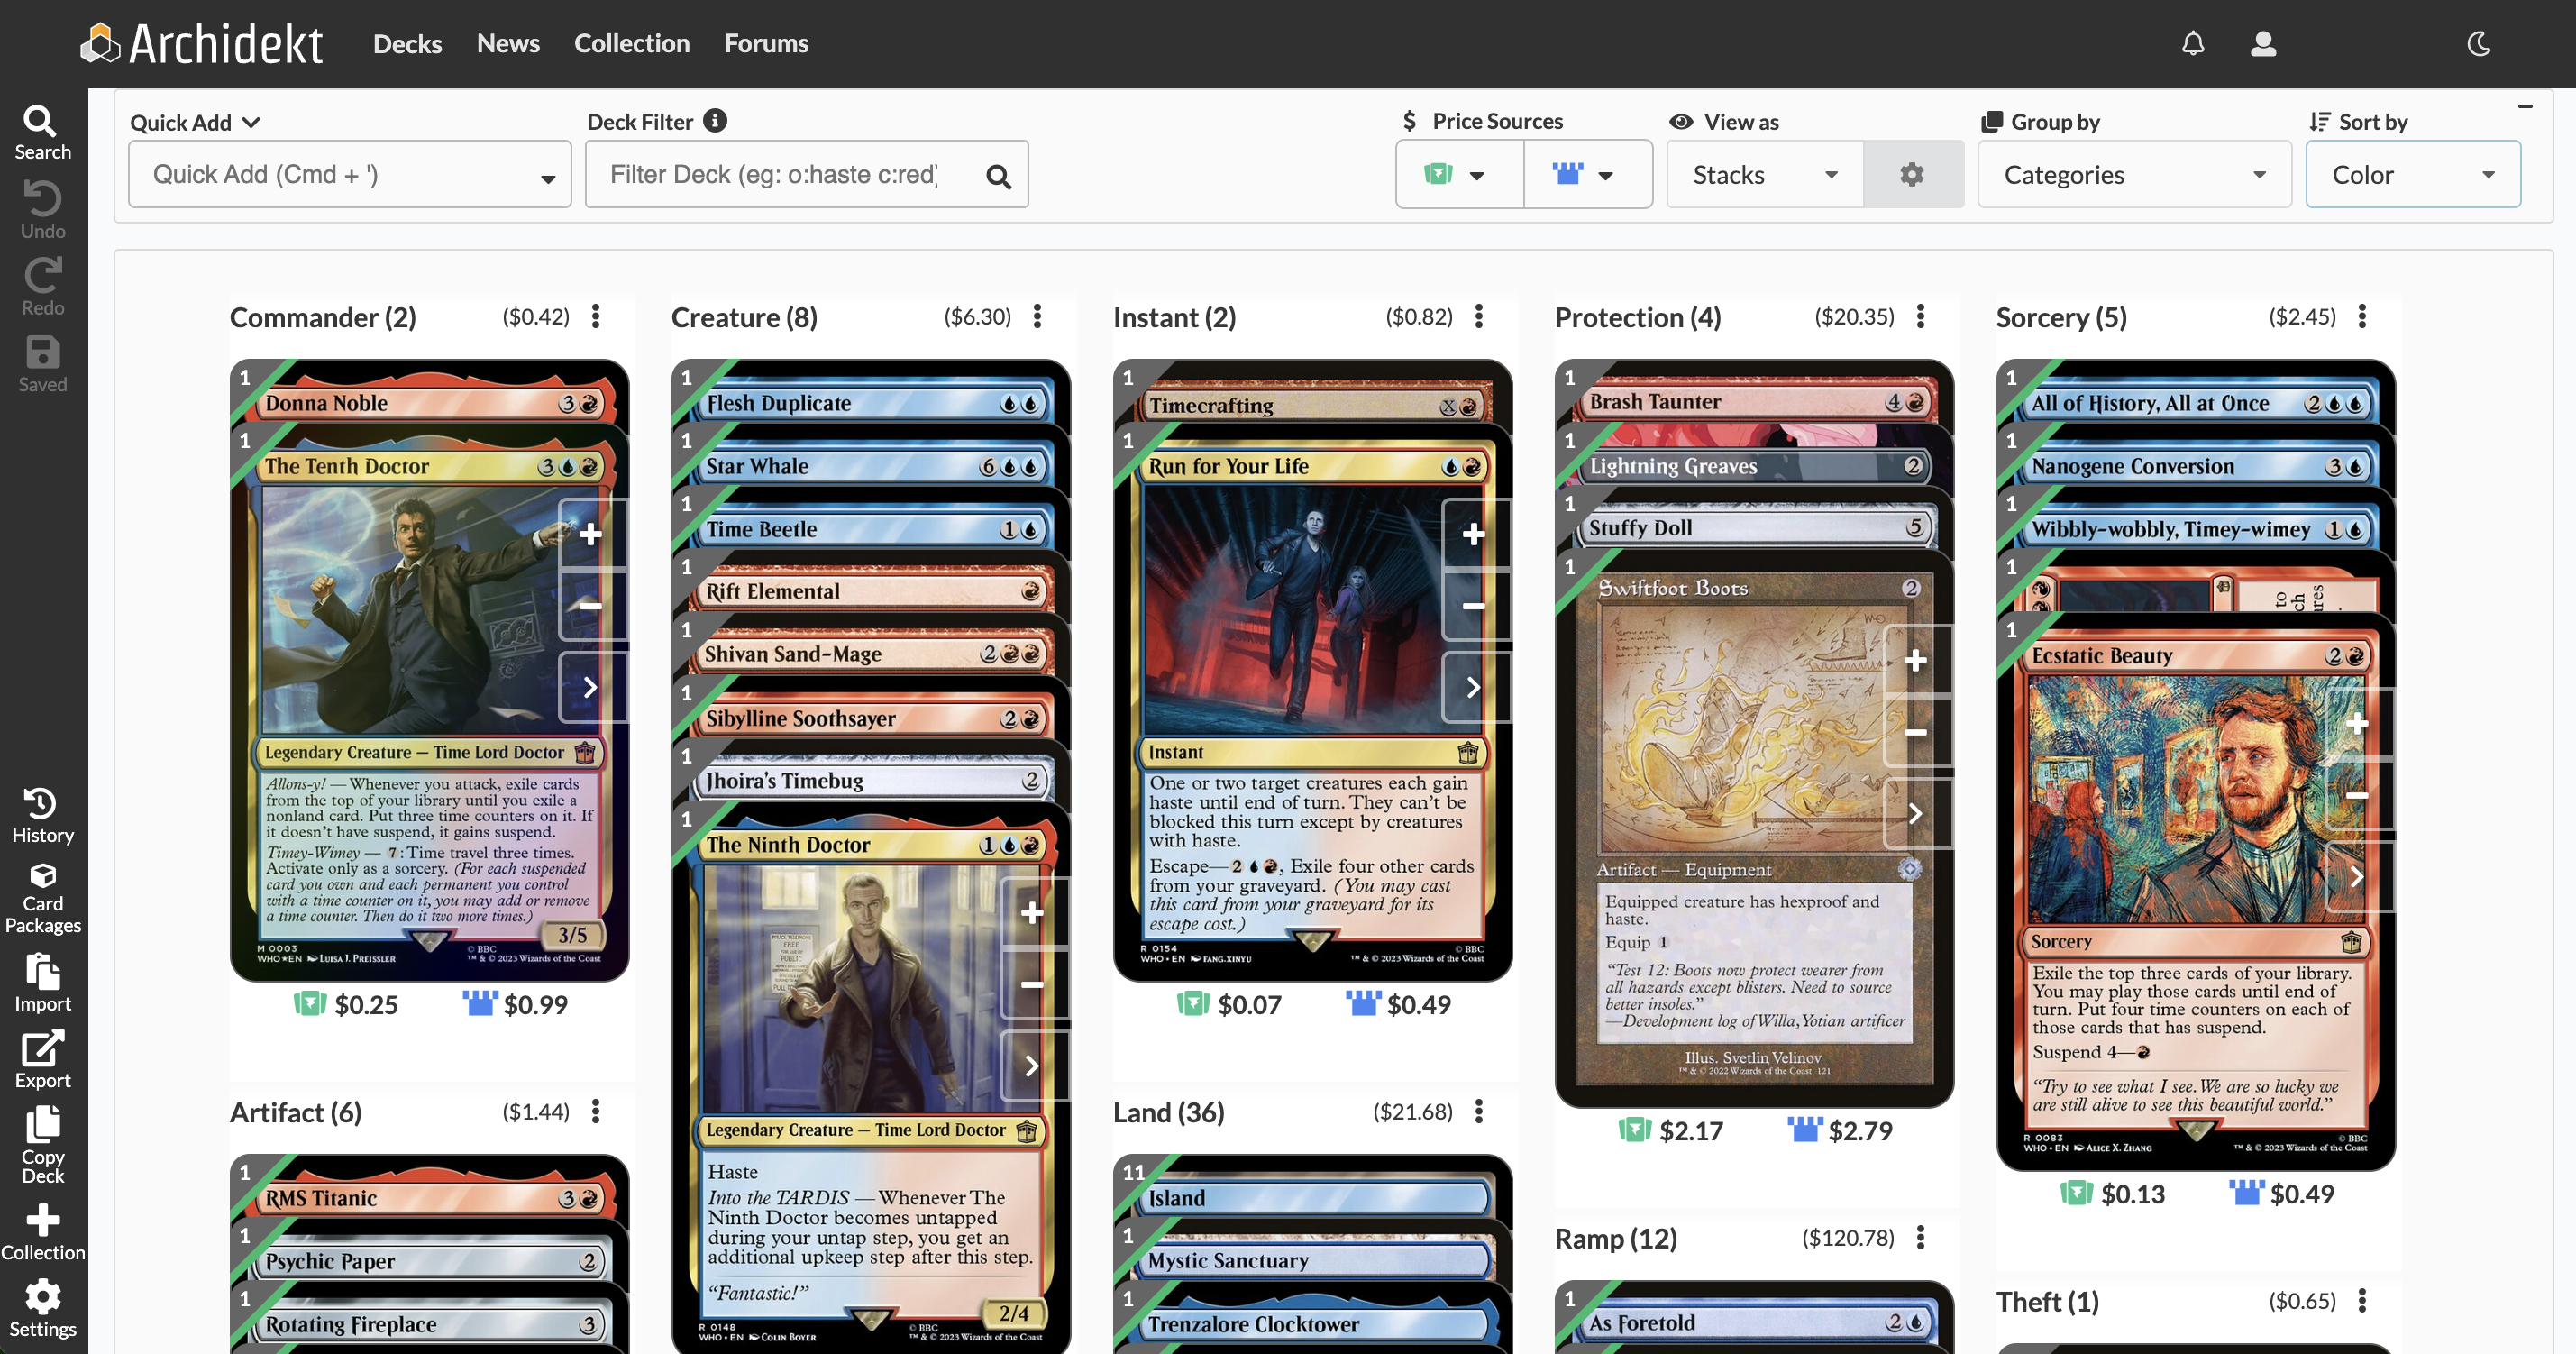 A screengrab of a deck view on the Archidekt website, displaying roughly 20 Magic the Gathering Doctor Who set cards divided into groups such as Commander, Creature, and Sorcery.